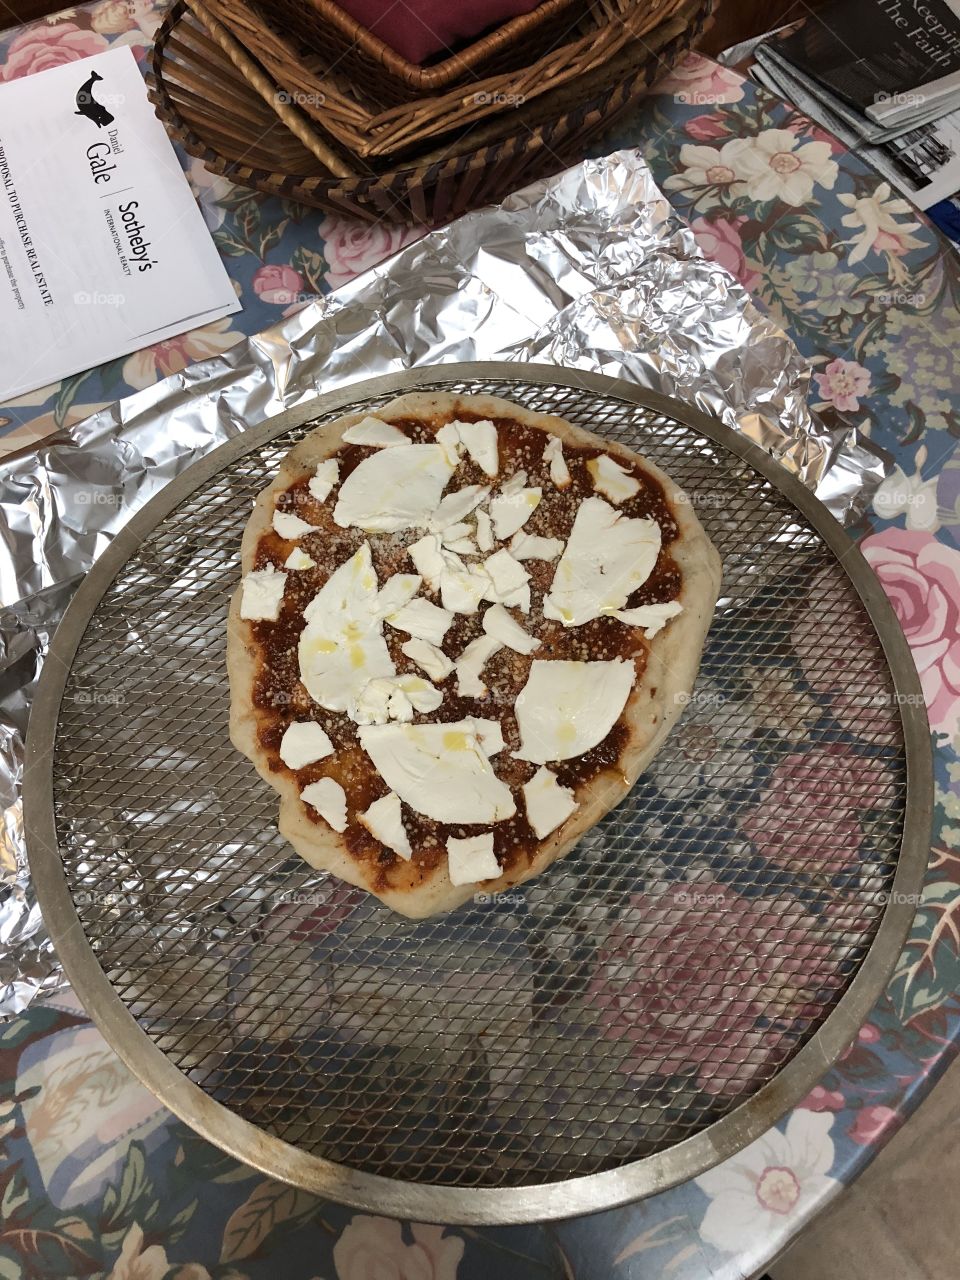 A nice homemade pizza for Easter.